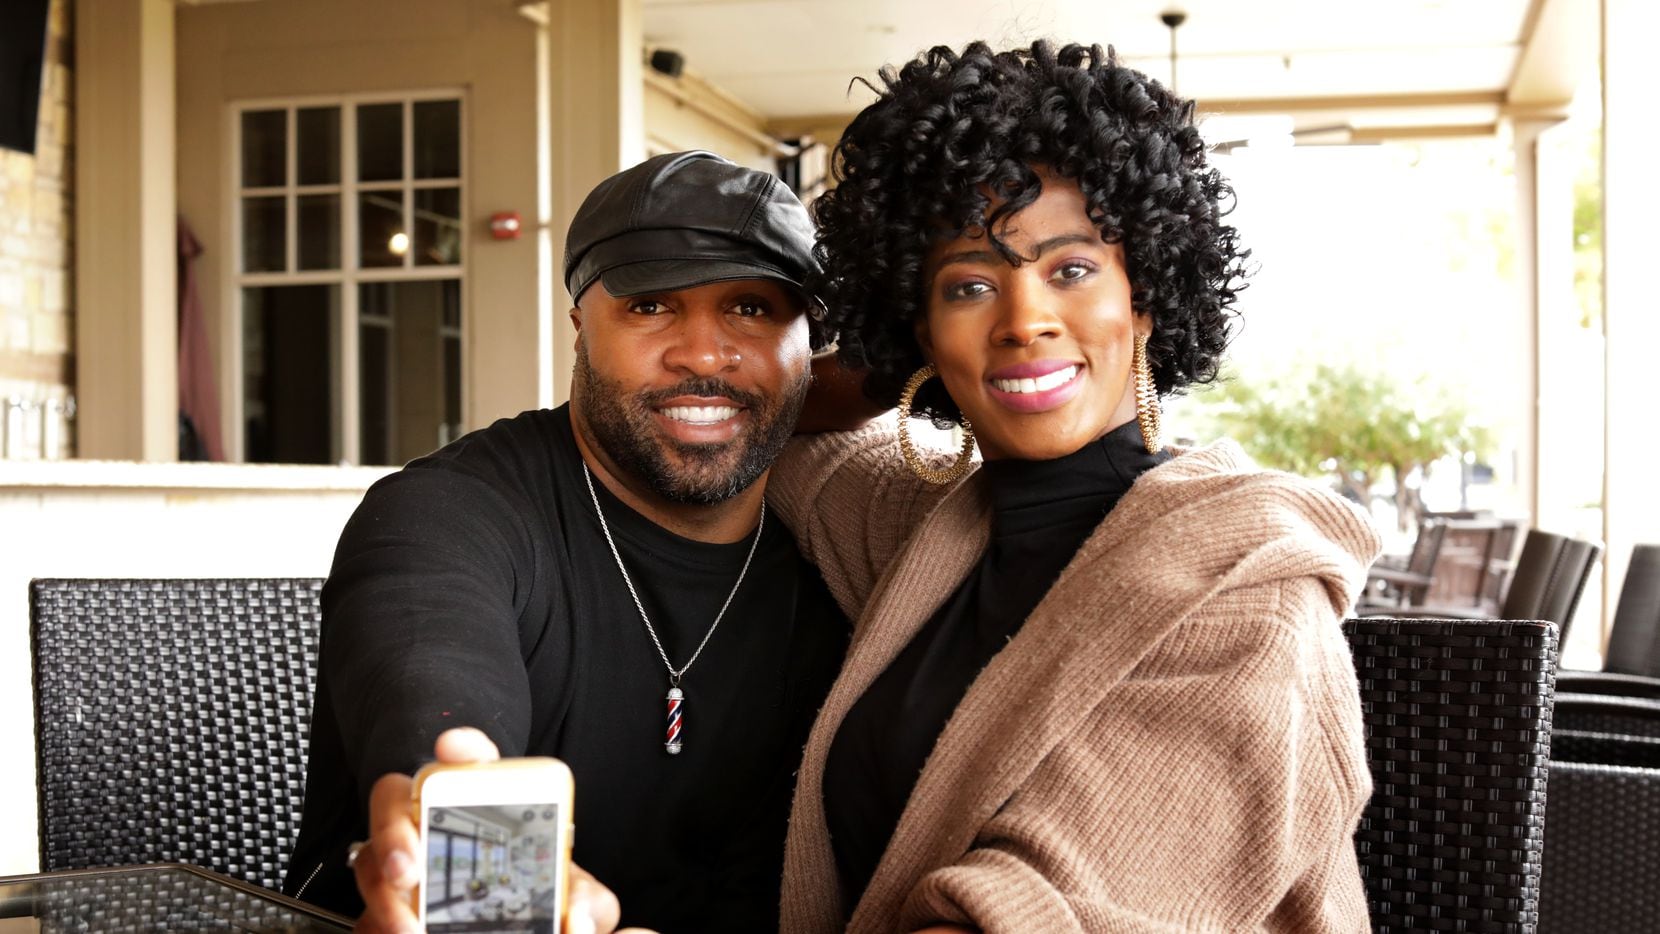 Dr. Tye Caldwell, left, and Courtney Caldwell of ShearShare posed for a photograph at Stonebriar Country Club in Frisco in October 2020.